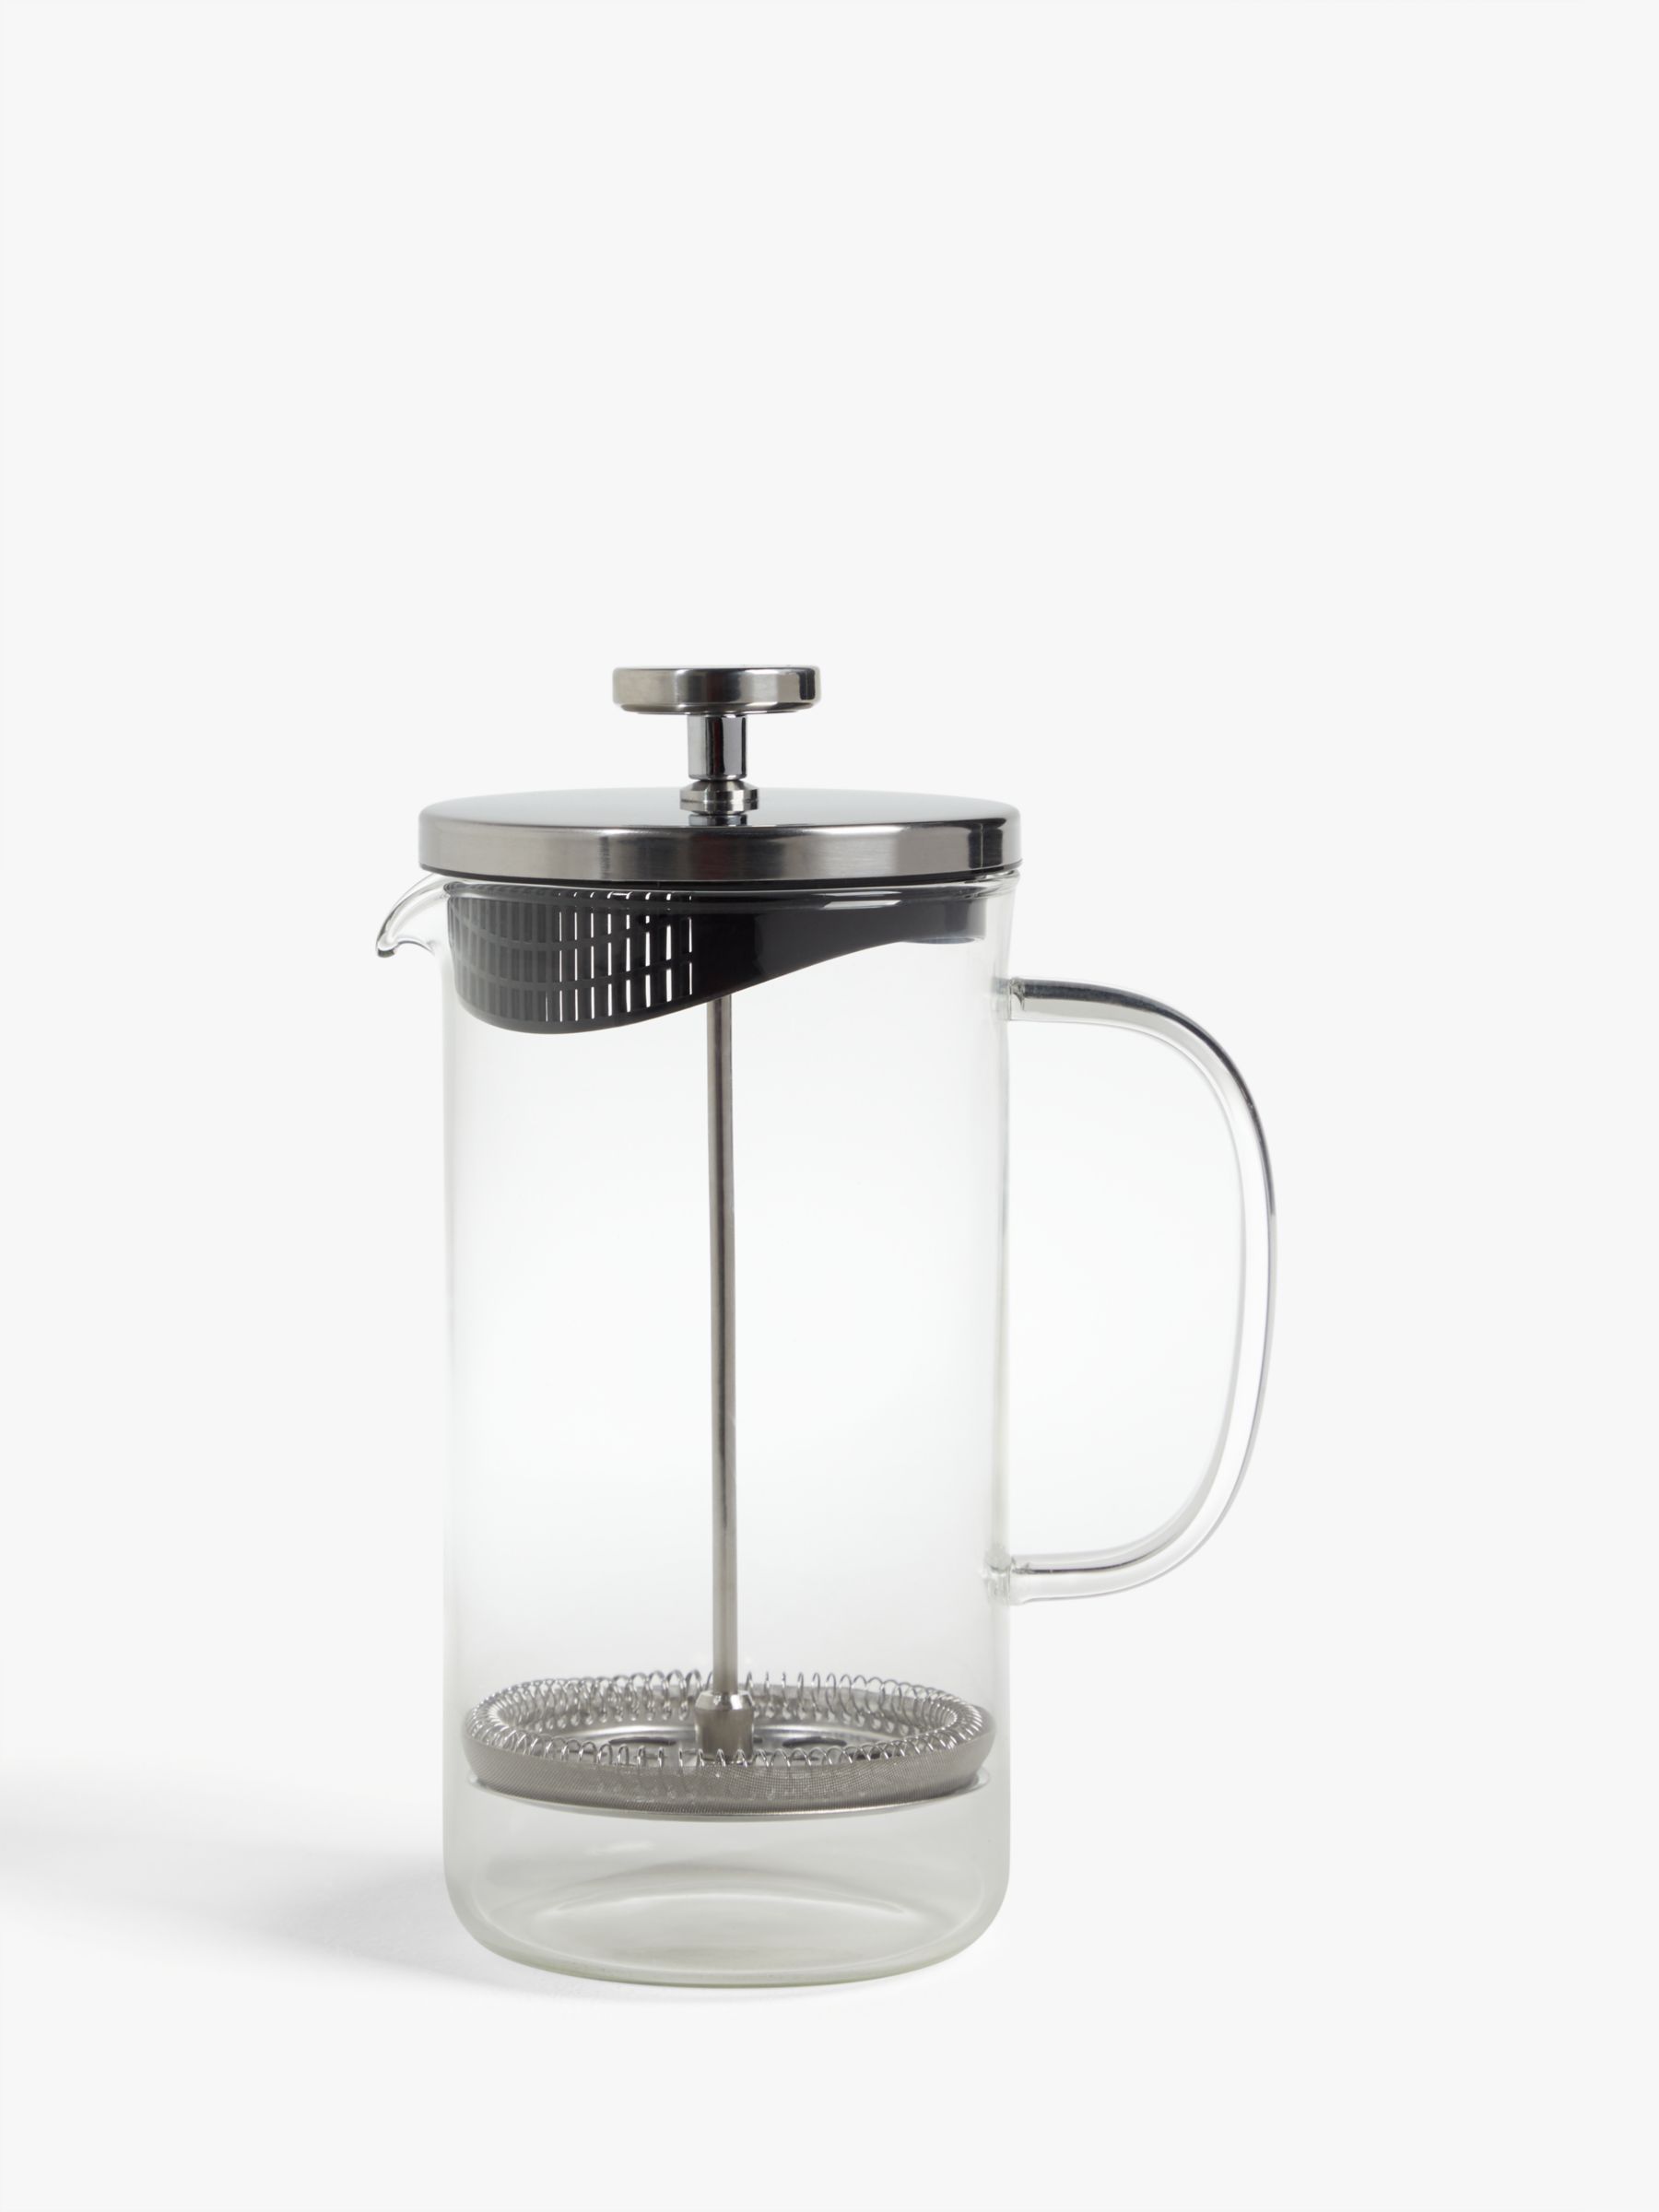 John Lewis & Partners 8 Cup Cafetiere, 1L at John Lewis & Partners